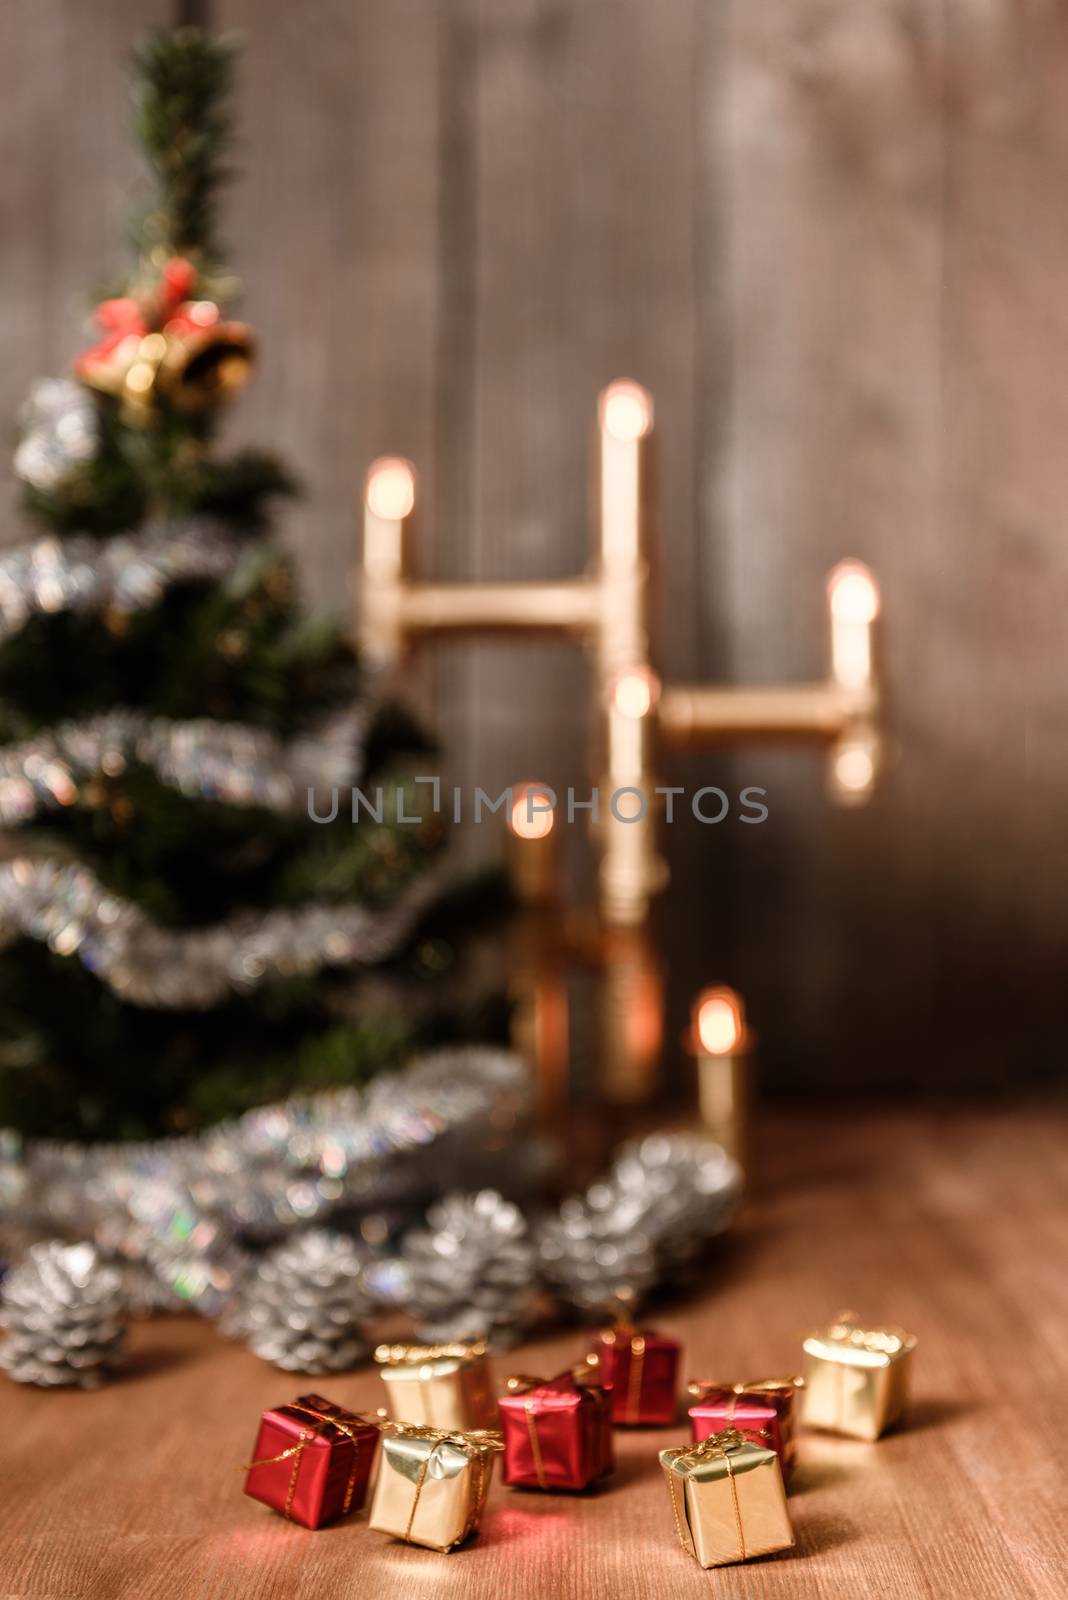 Christmas decorative tree is adorned with rain stands on the table with a lit lamp lights